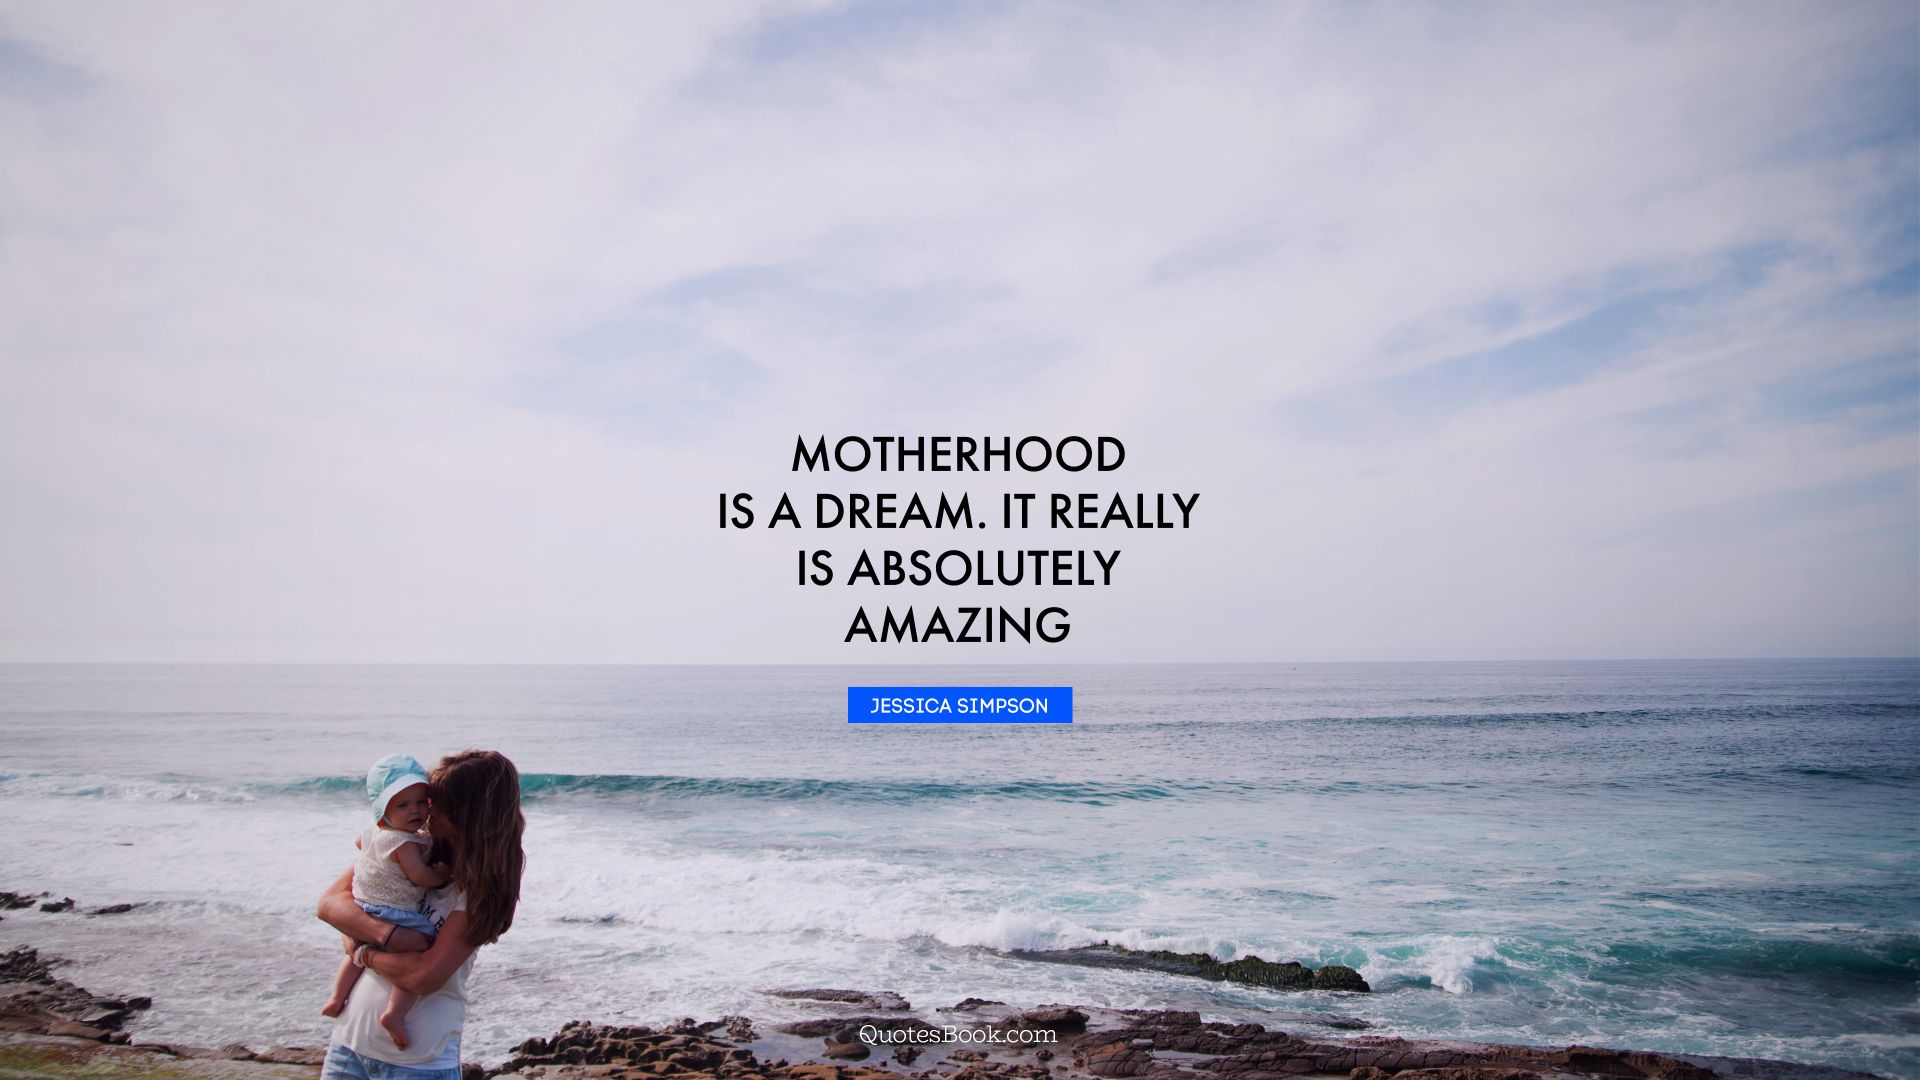 Motherhood is a dream. It really is absolutely amazing. - Quote by Jessica Simpson